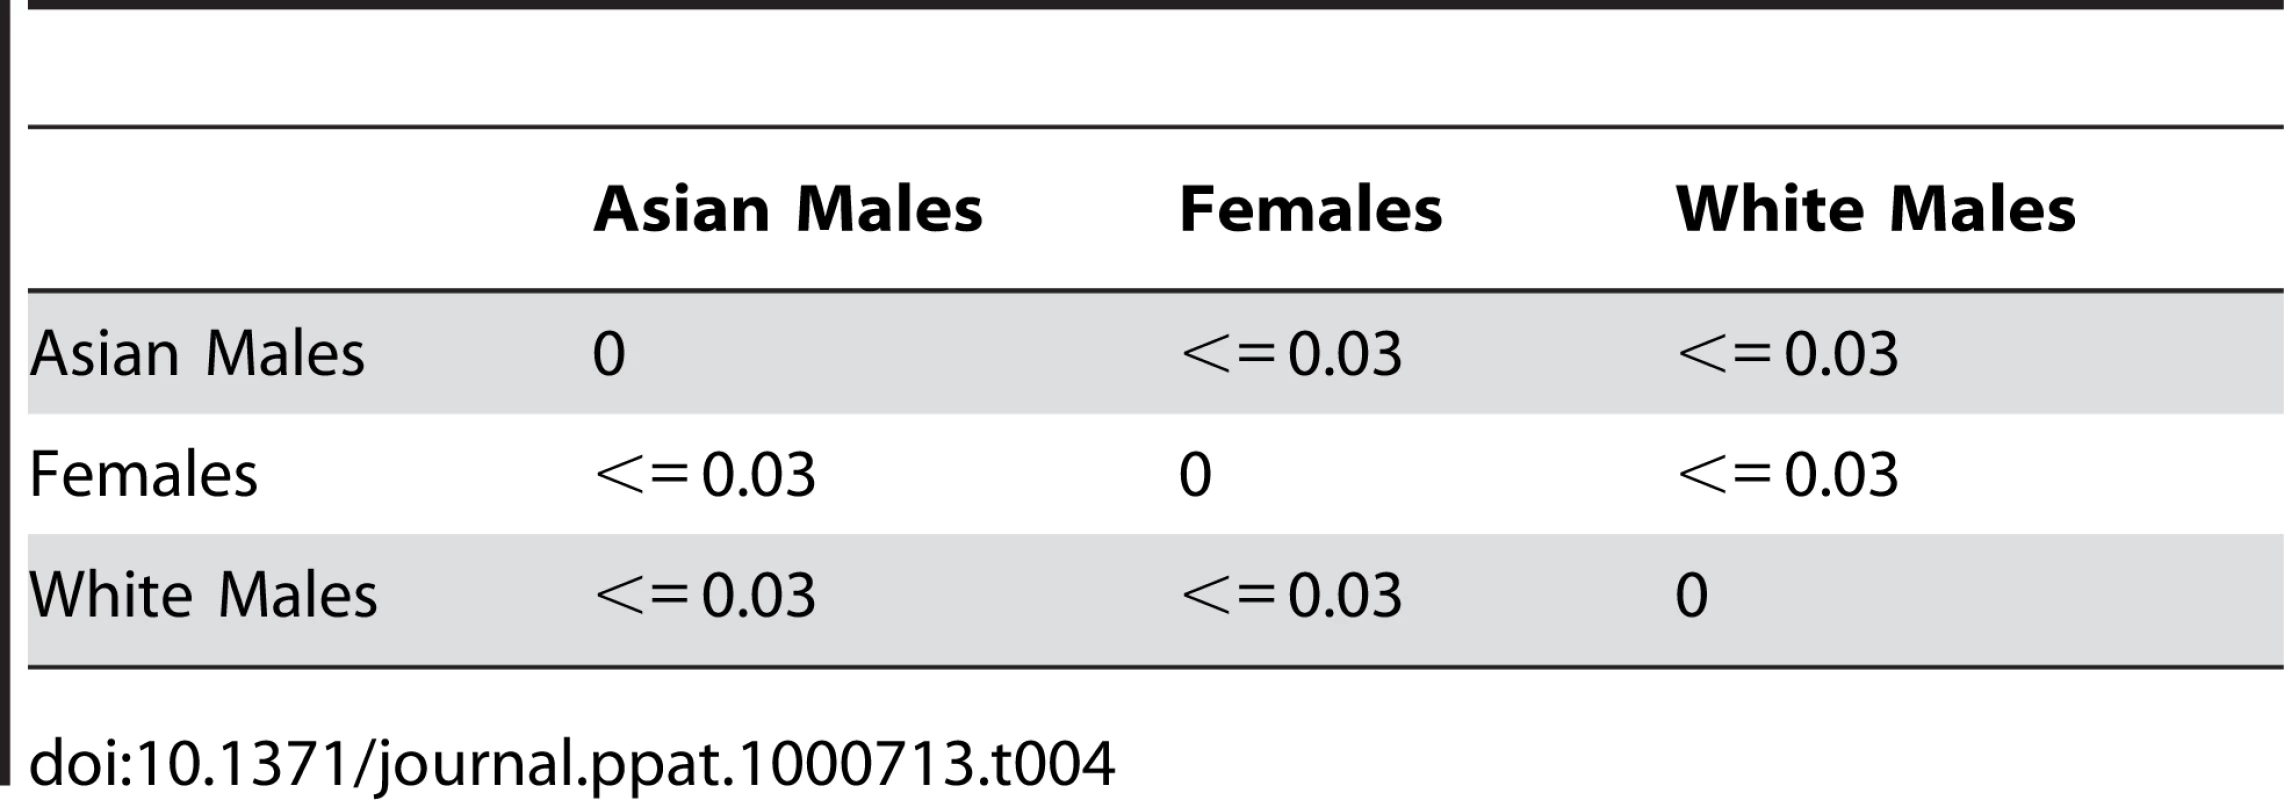 UniFrac analysis of data belonging to clusters of females, White males, and Asian males.